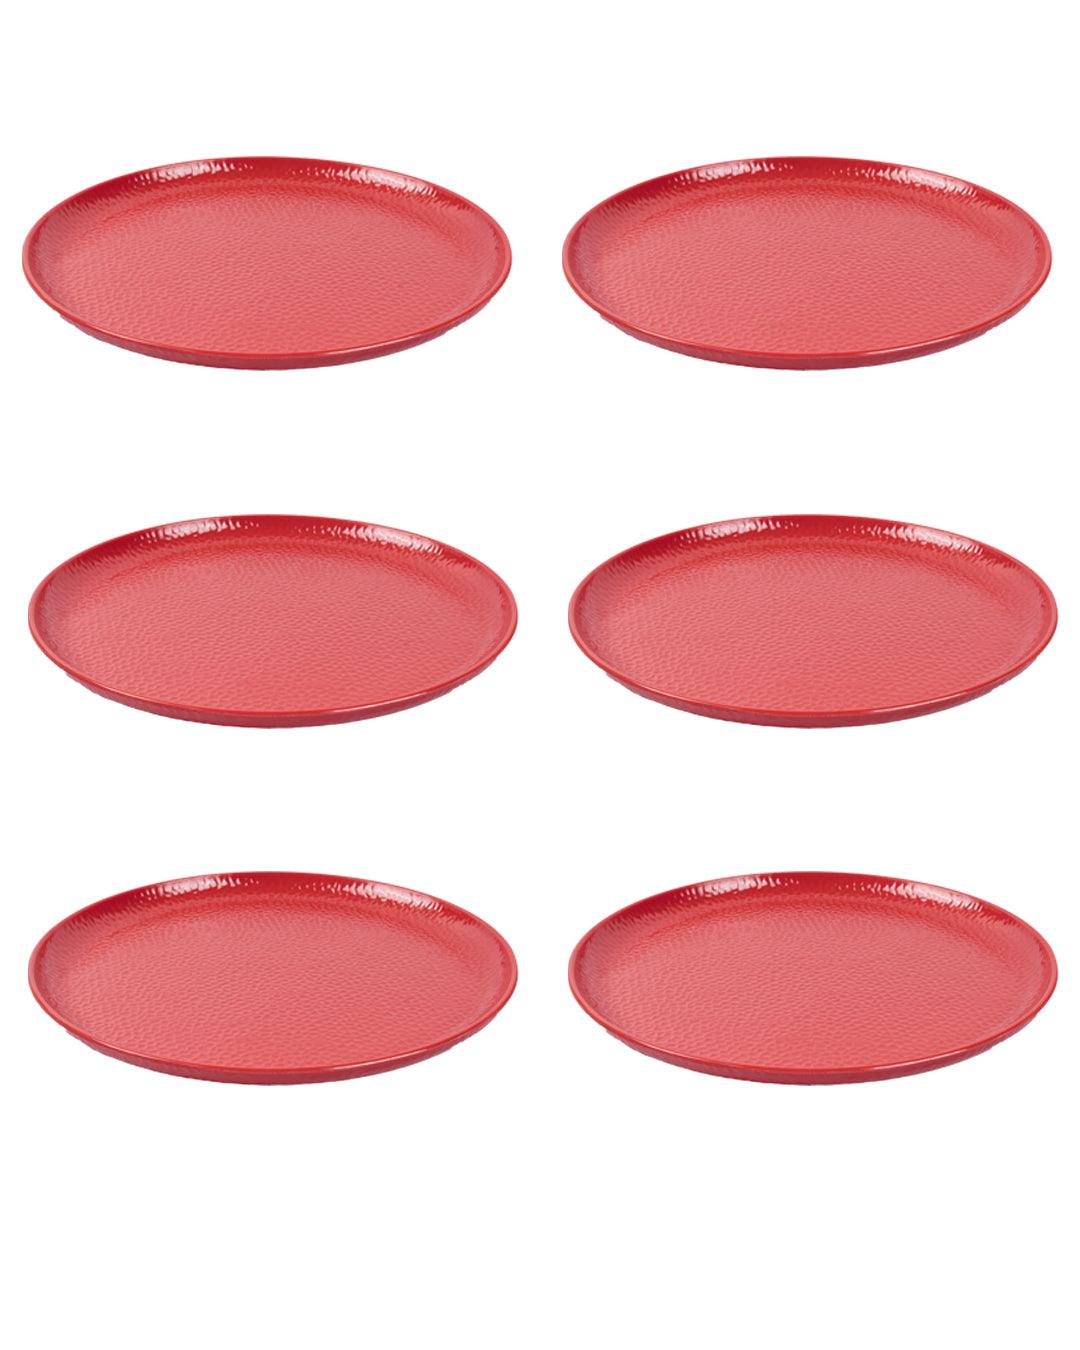 Market 99 Hammered Melamine Tableware Red Glossy Finish Full Plates for Dining Table (Set Of 6, Red) - MARKET 99